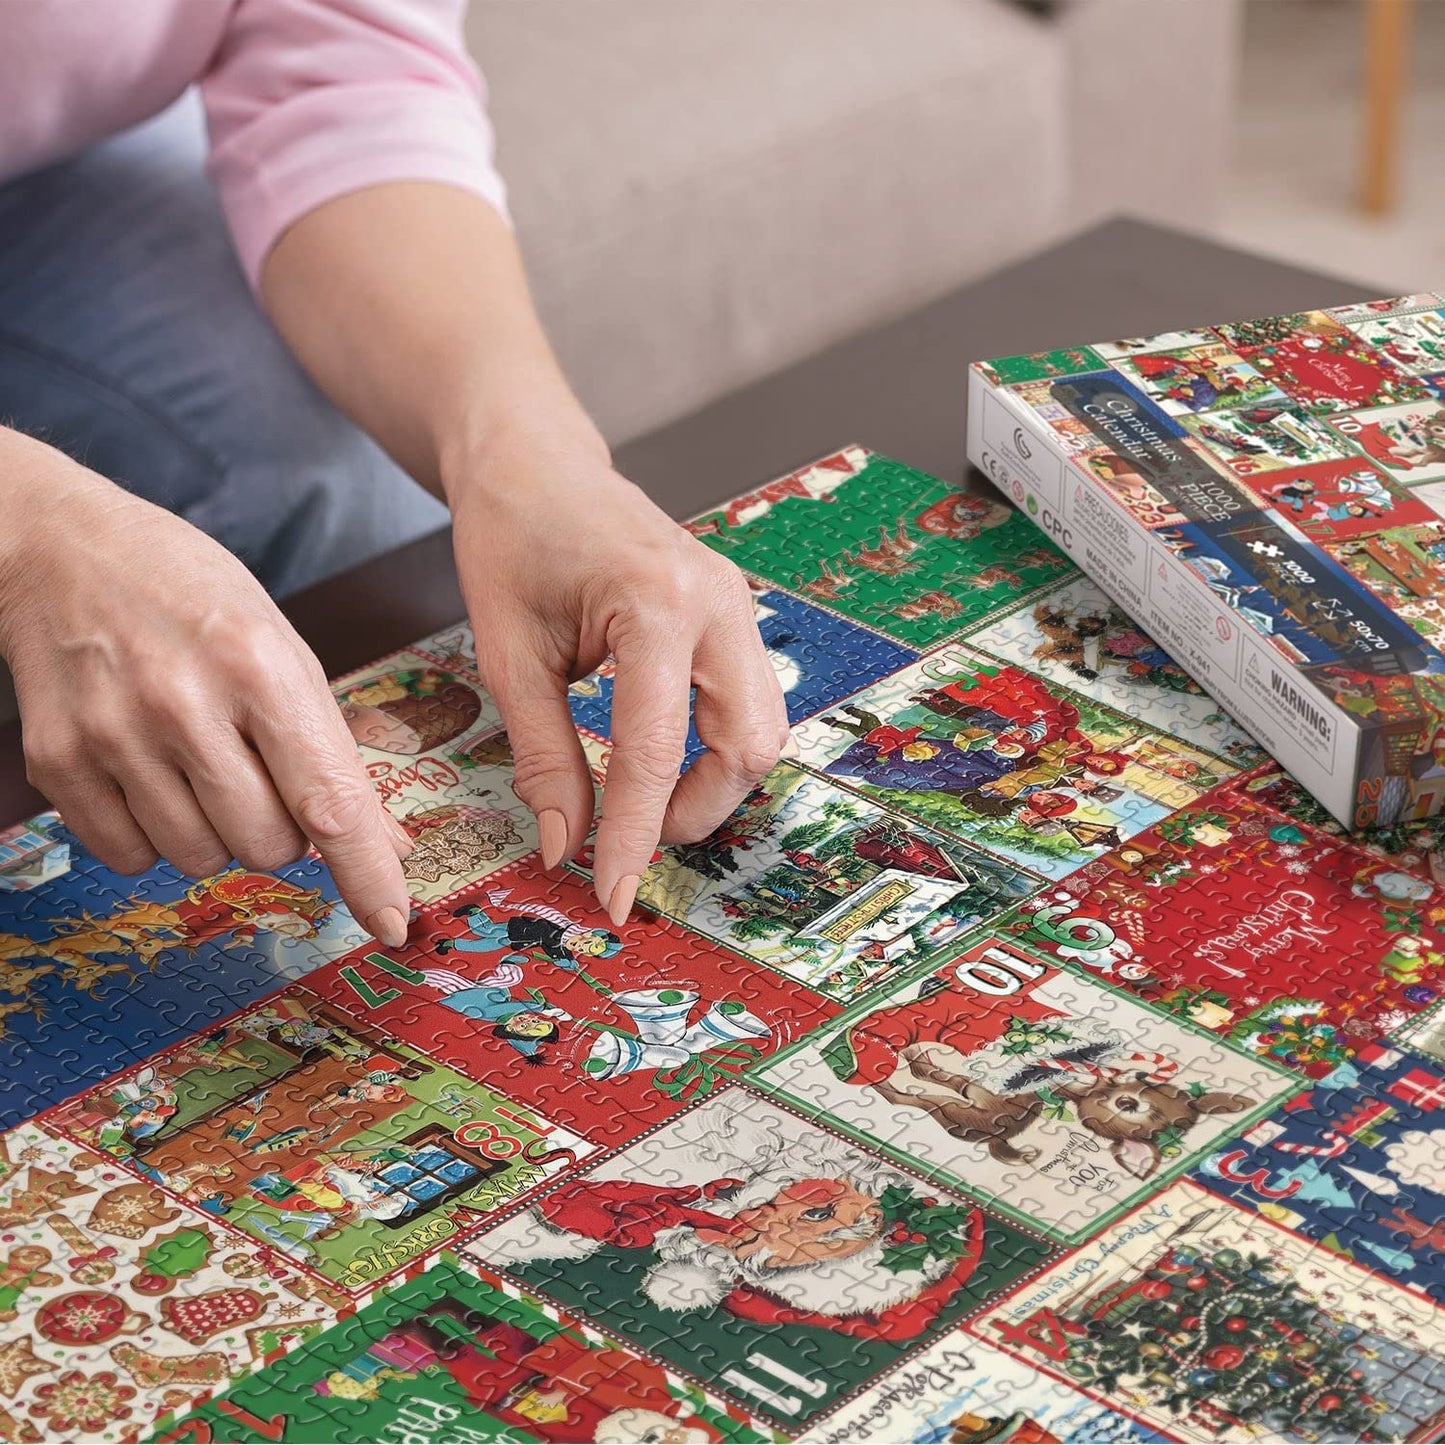 🎄Christmas Advent Calendar Puzzle Fun! 🧩 Count Down to the Holidays with Jigsaw Puzzles!